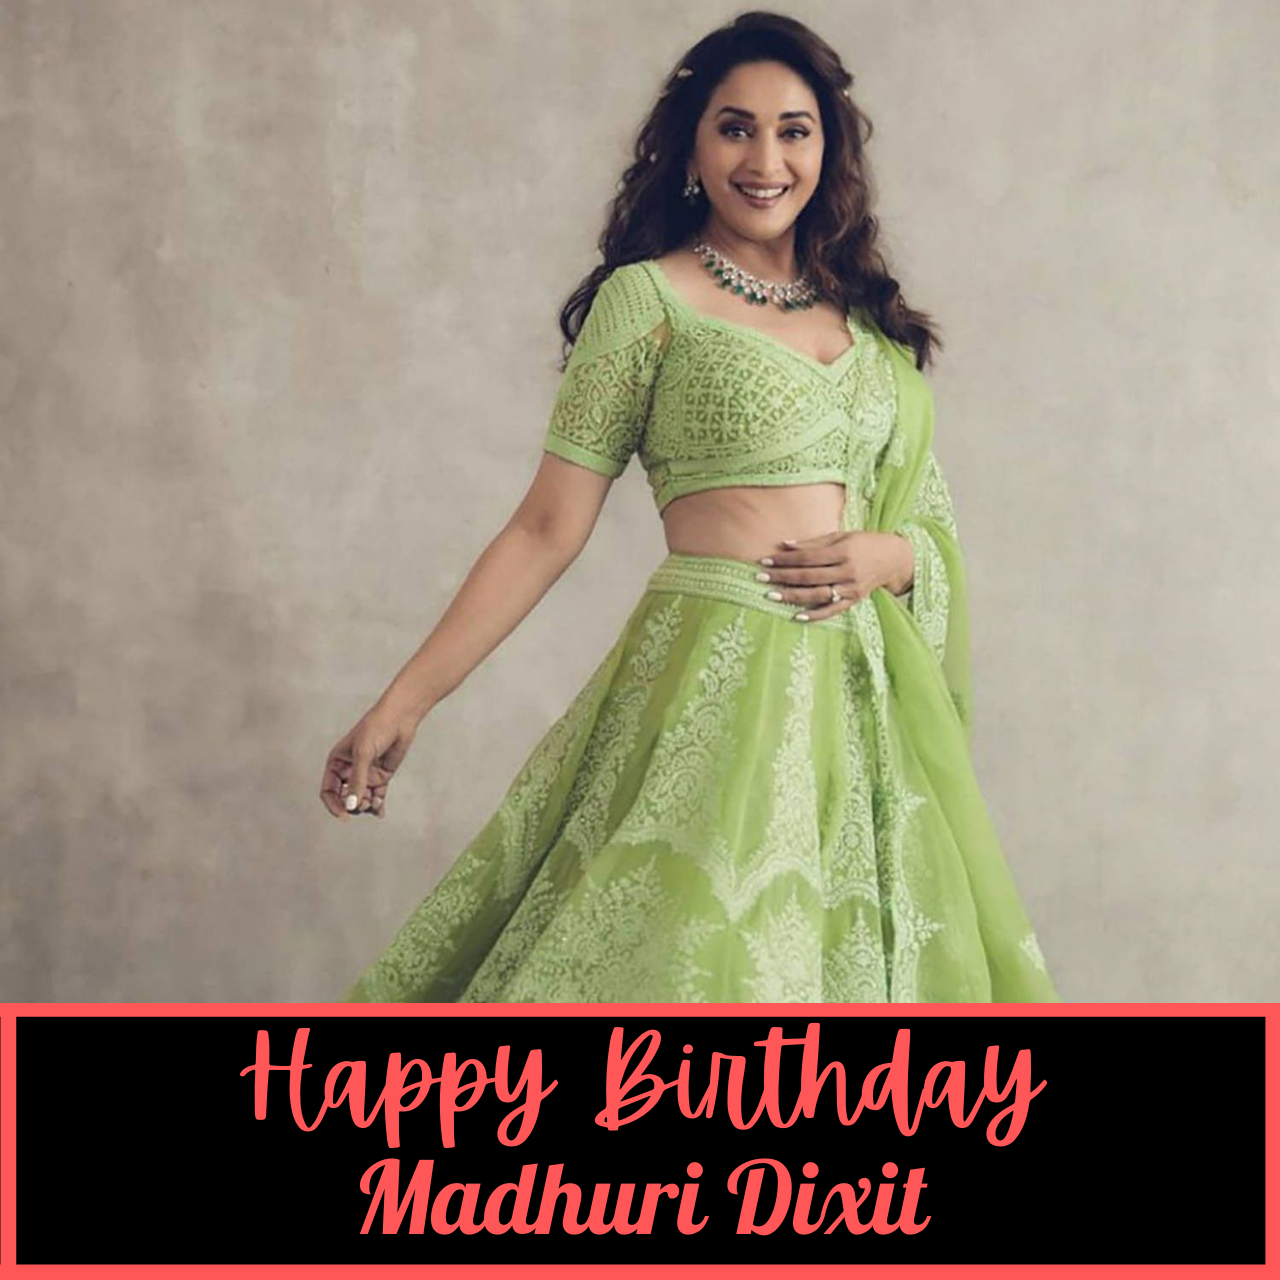 Happy Birthday Madhuri Dixit: Use These Wishes, Quotes, Images, Messages, and WhatsApp Status Videos to greet 'Bubbly'